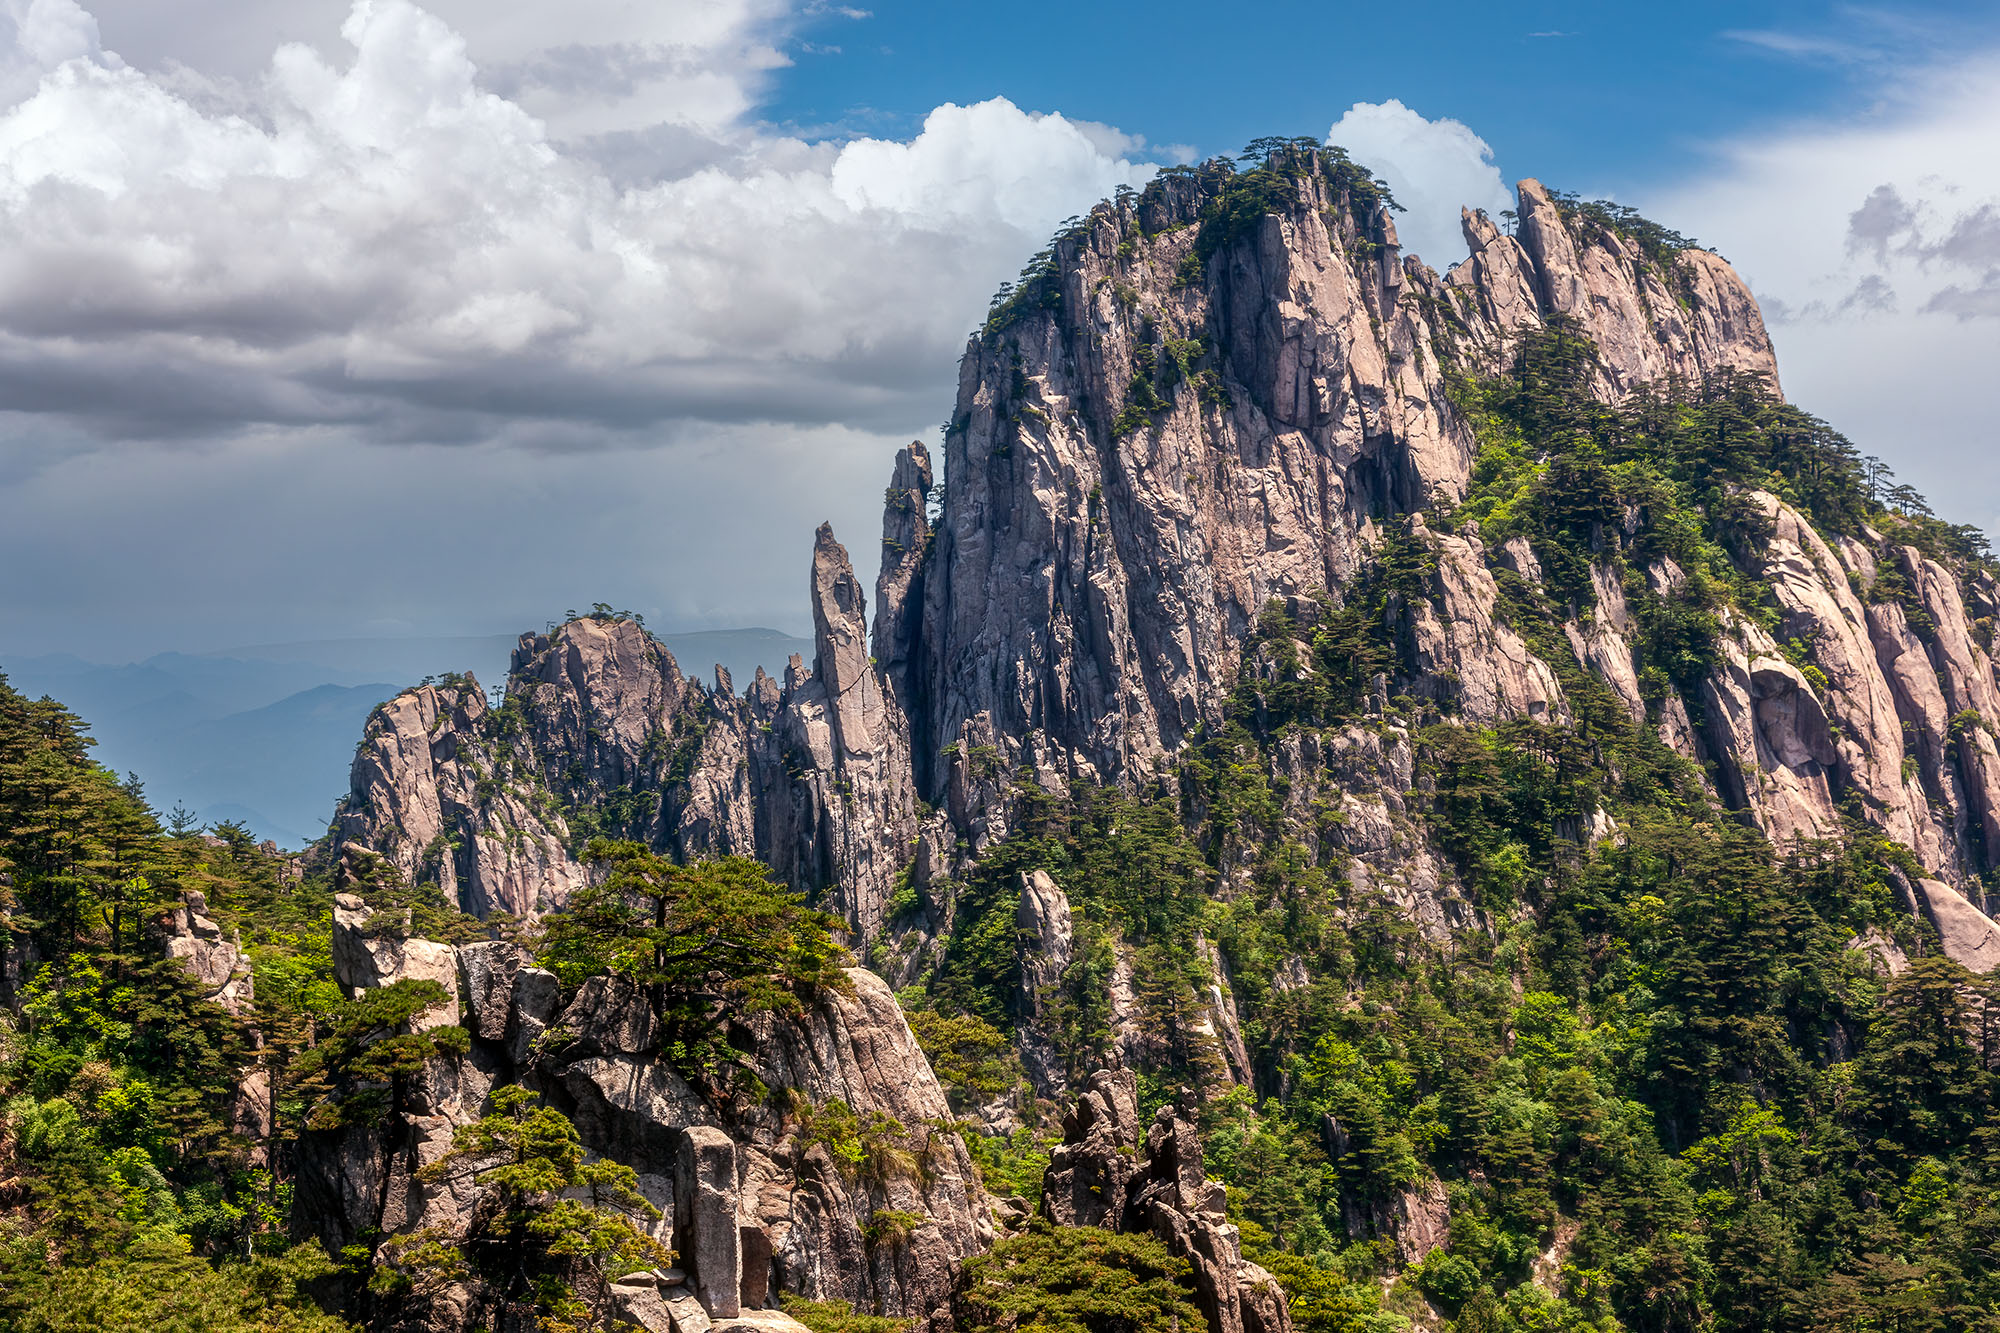 In this image from the East Sea Yellow Mountains of Mount Huangshan, China, nature reveals its rugged and untamed beauty. The...